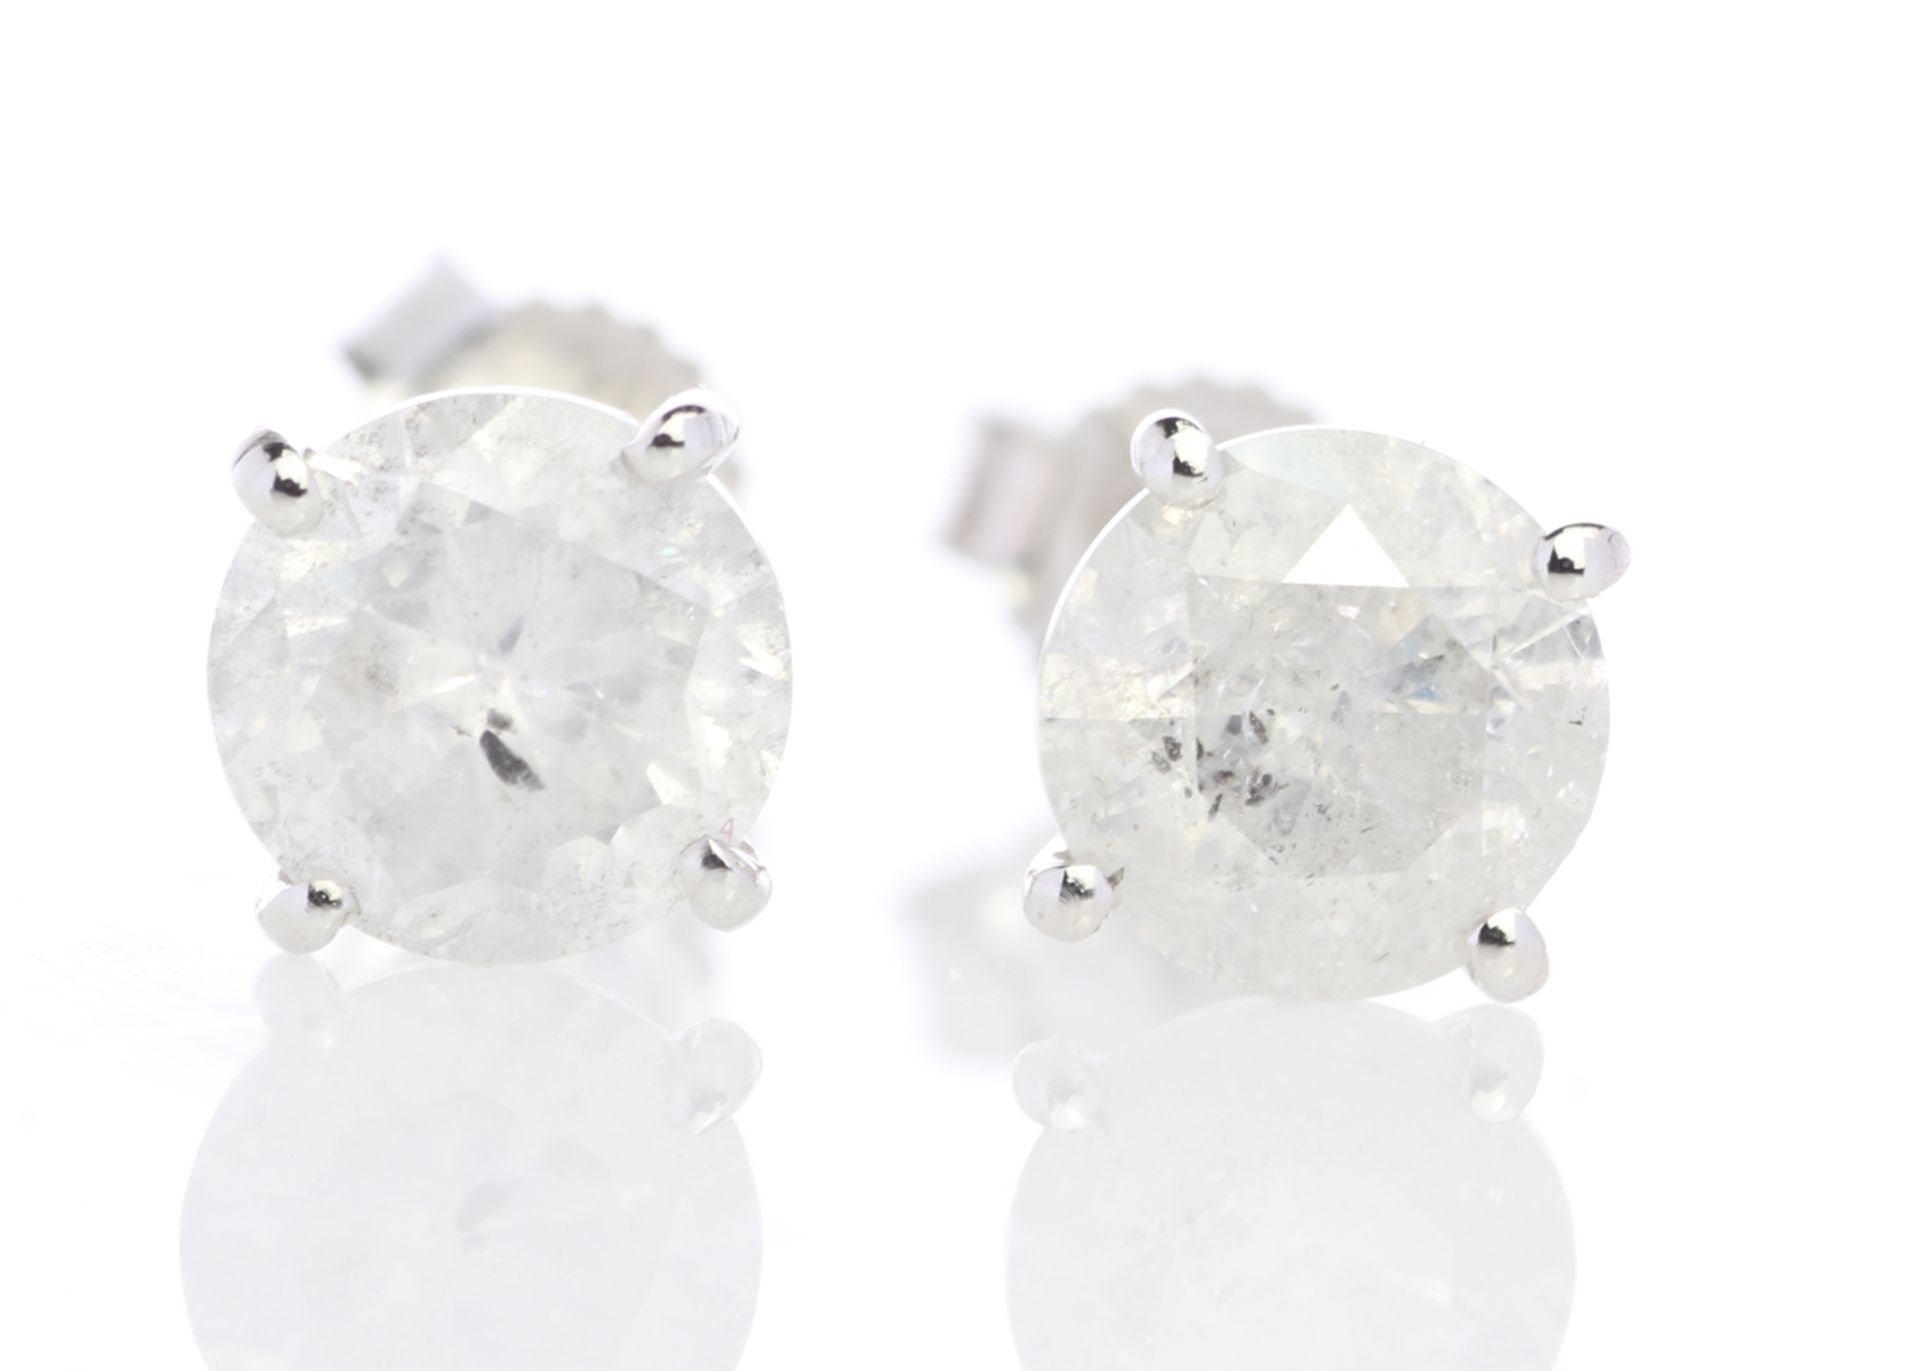 9ct White Gold Single Stone Prong Set Diamond Earring 2.01 Carats - Valued by GIE £19,750.00 - Two - Image 2 of 3